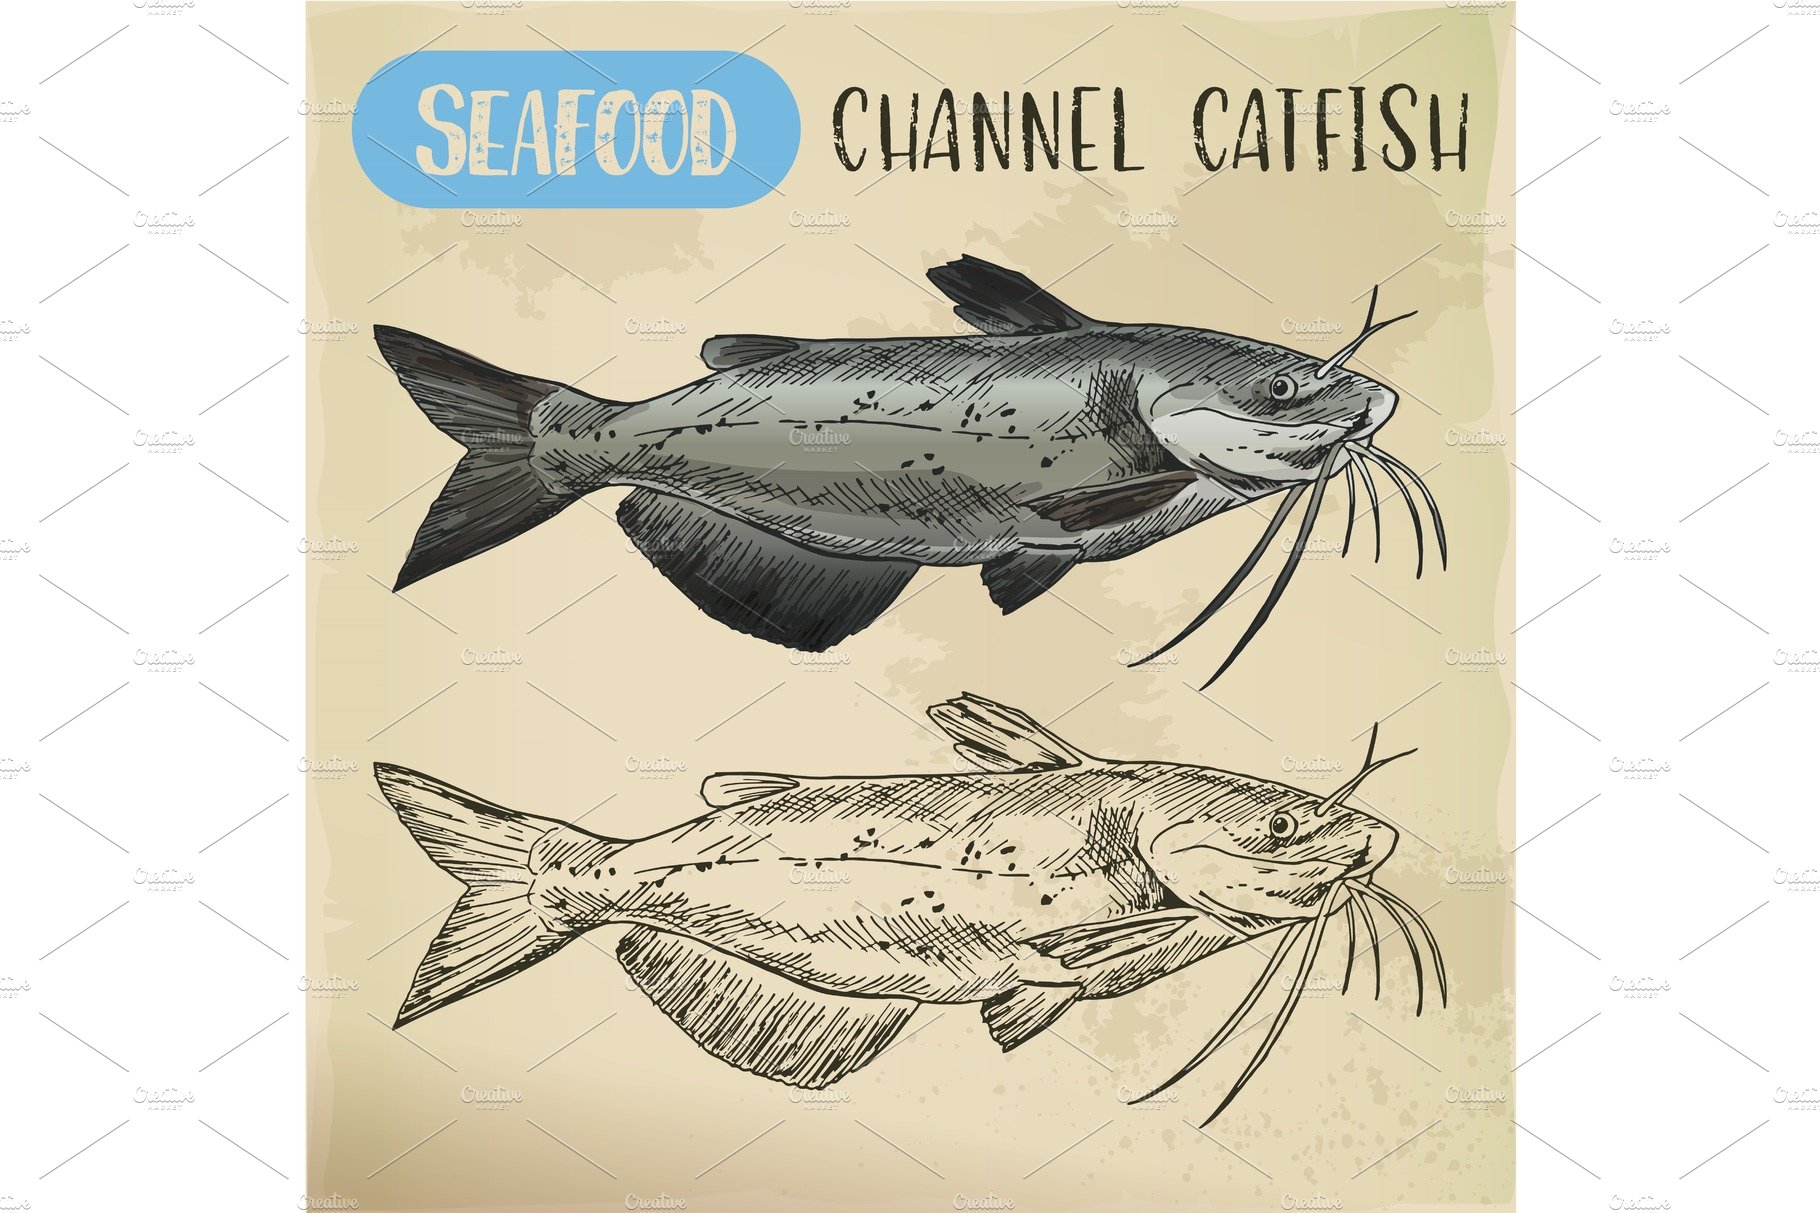 Channel catfish sketch. Seafood and fish cover image.